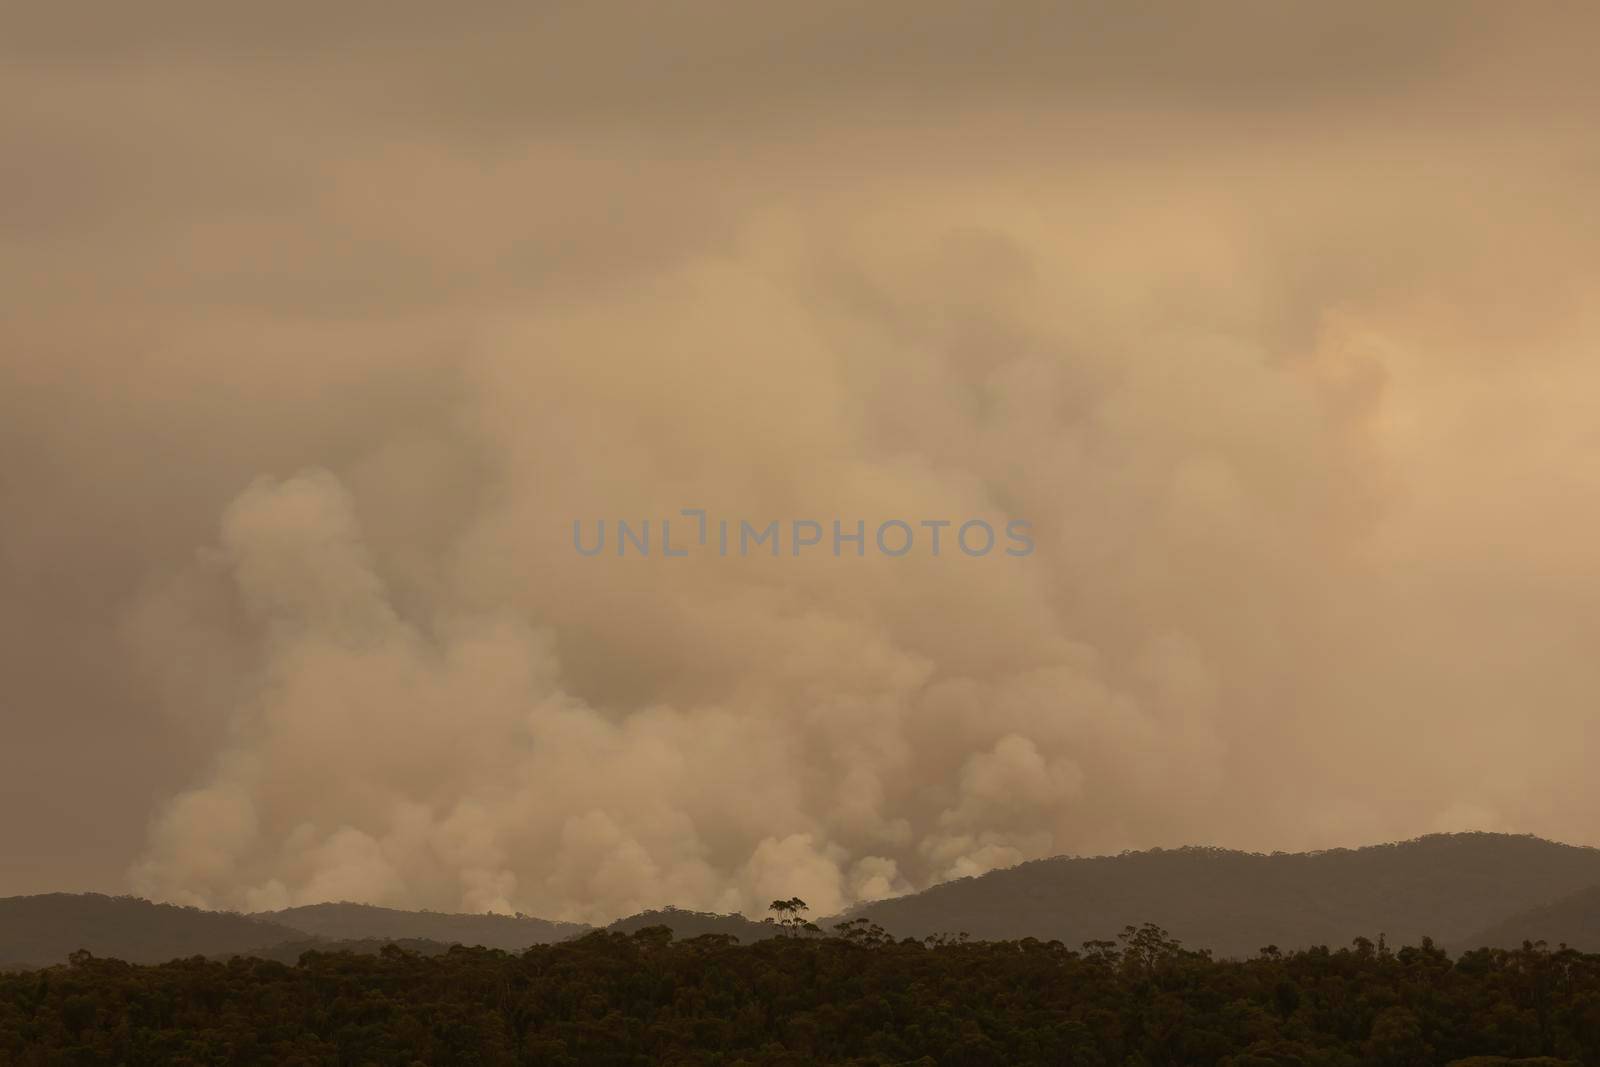 Smoke from a large bushfire in The Blue Mountains in Australia by WittkePhotos